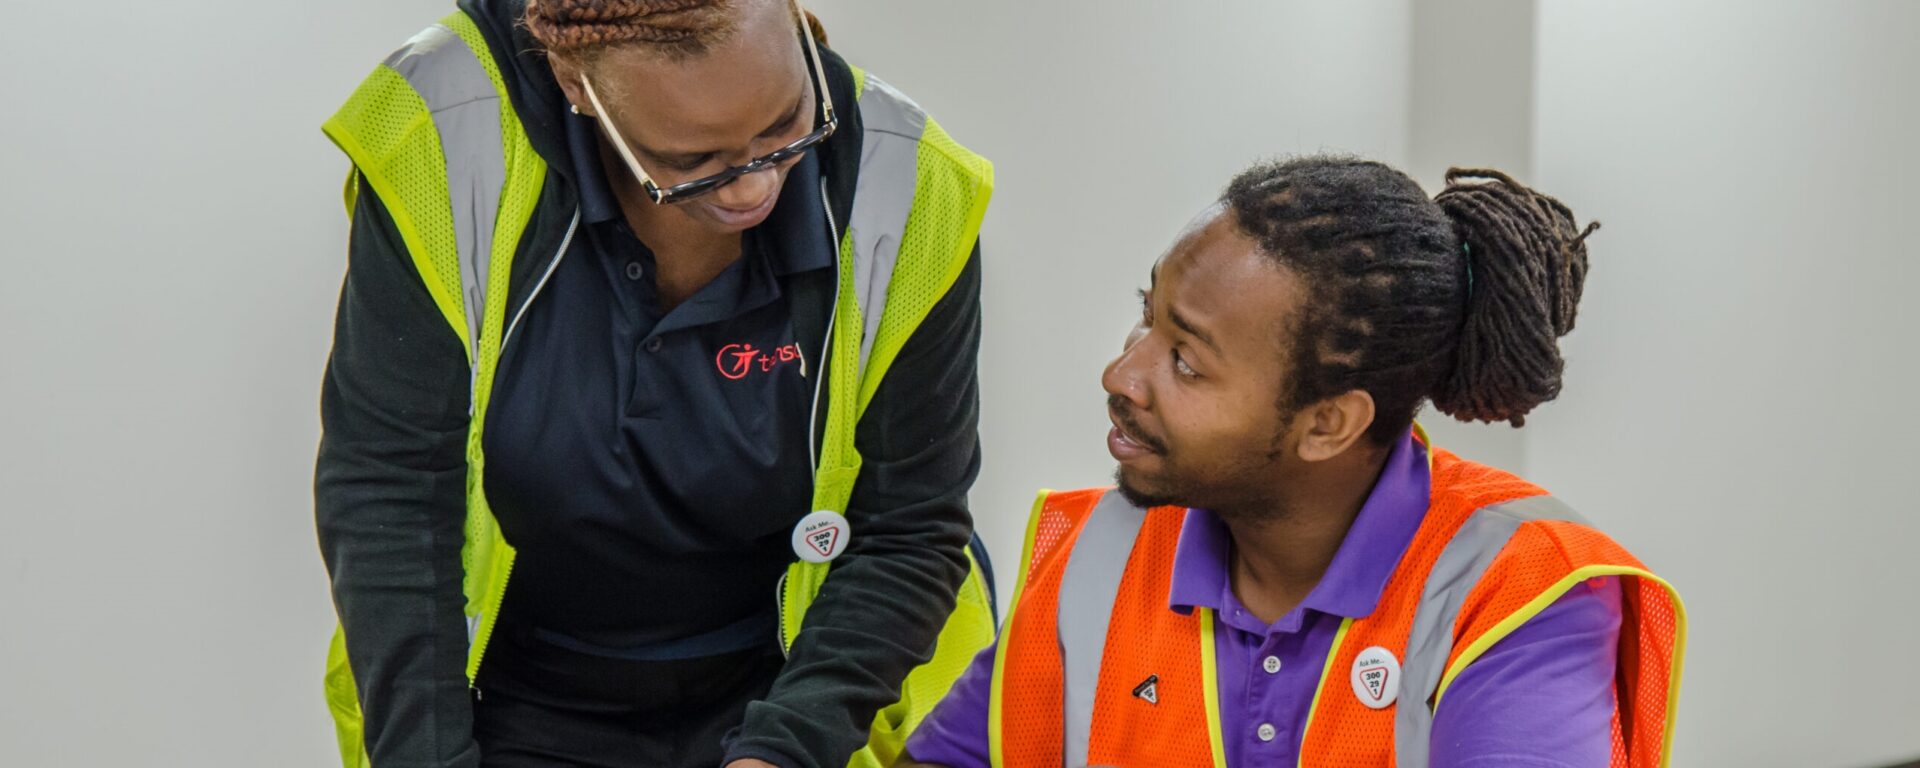 2 Transdev employees (a black woman and a black man) wearing reflective safety vests during a training session